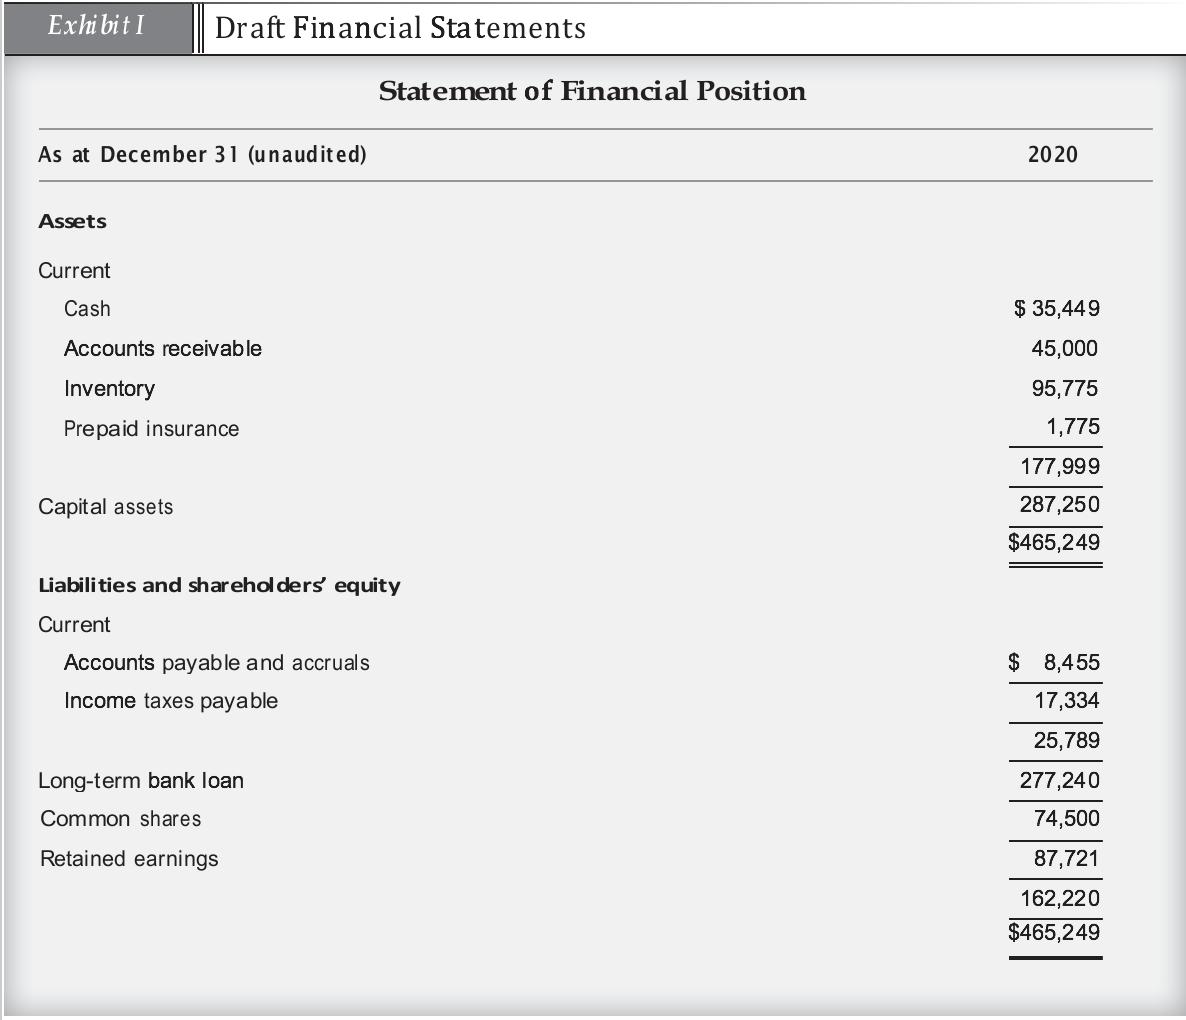 Exhi bit I Draft Financial Statements Statement of Financial Position As at December 31 (unaudited) 2020 Assets Current Cash